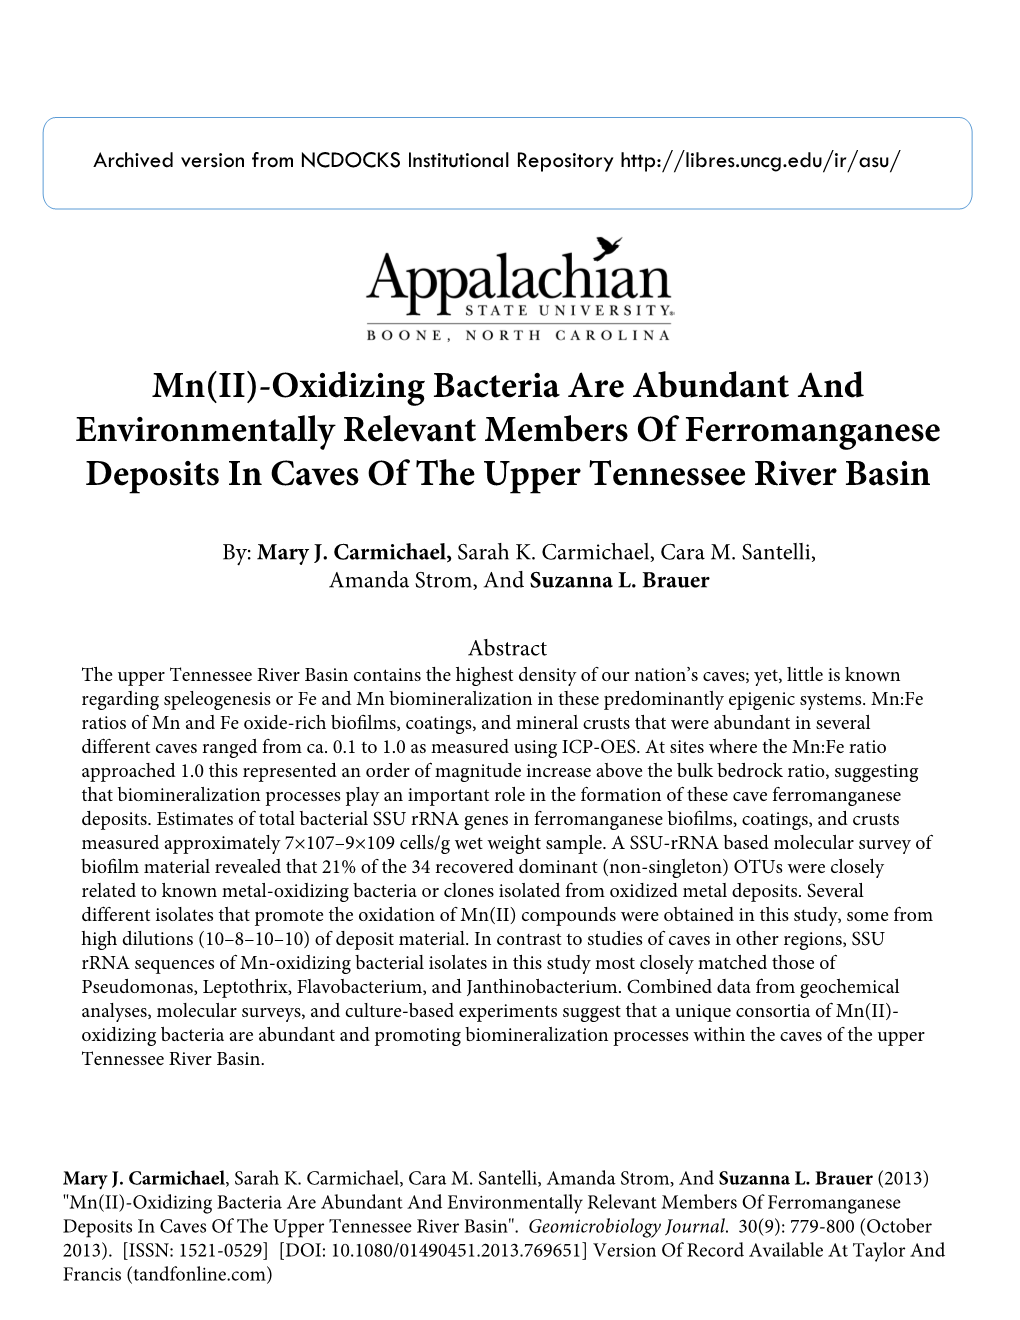 Mn(II)-Oxidizing Bacteria Are Abundant and Environmentally Relevant Members of Ferromanganese Deposits in Caves of the Upper Tennessee River Basin